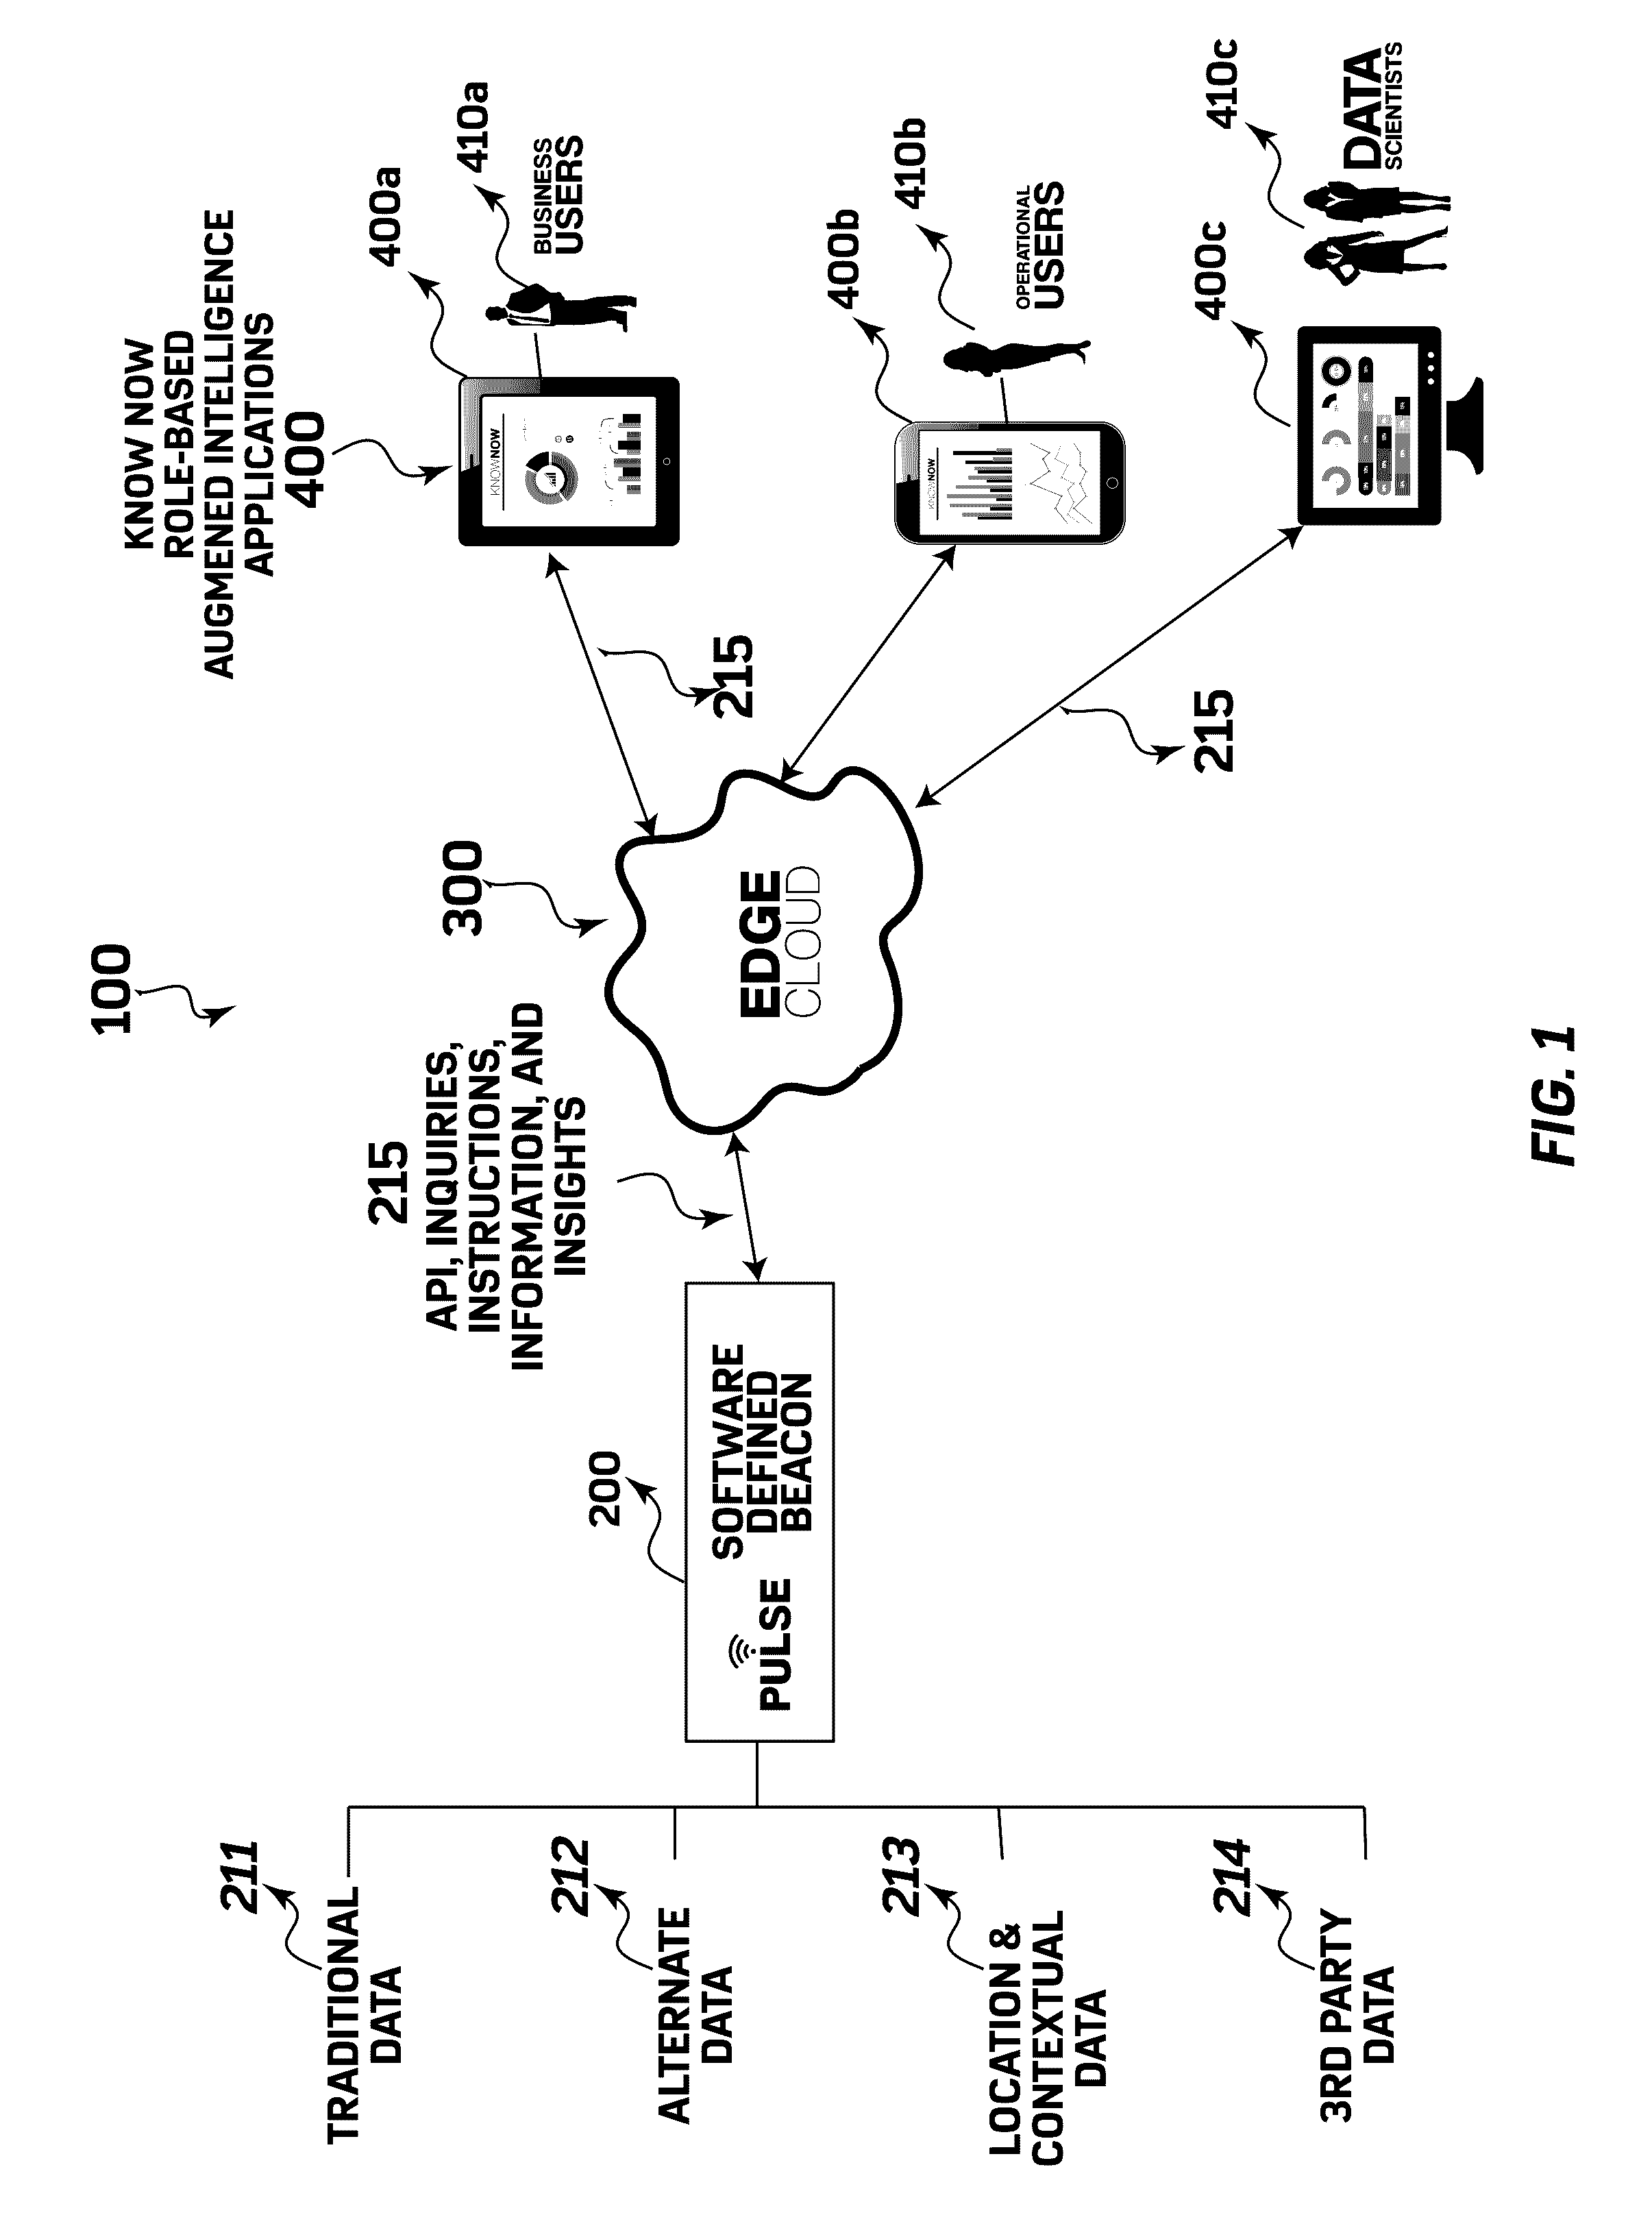 System and method for creating biologically based enterprise data genome to predict and recommend enterprise performance